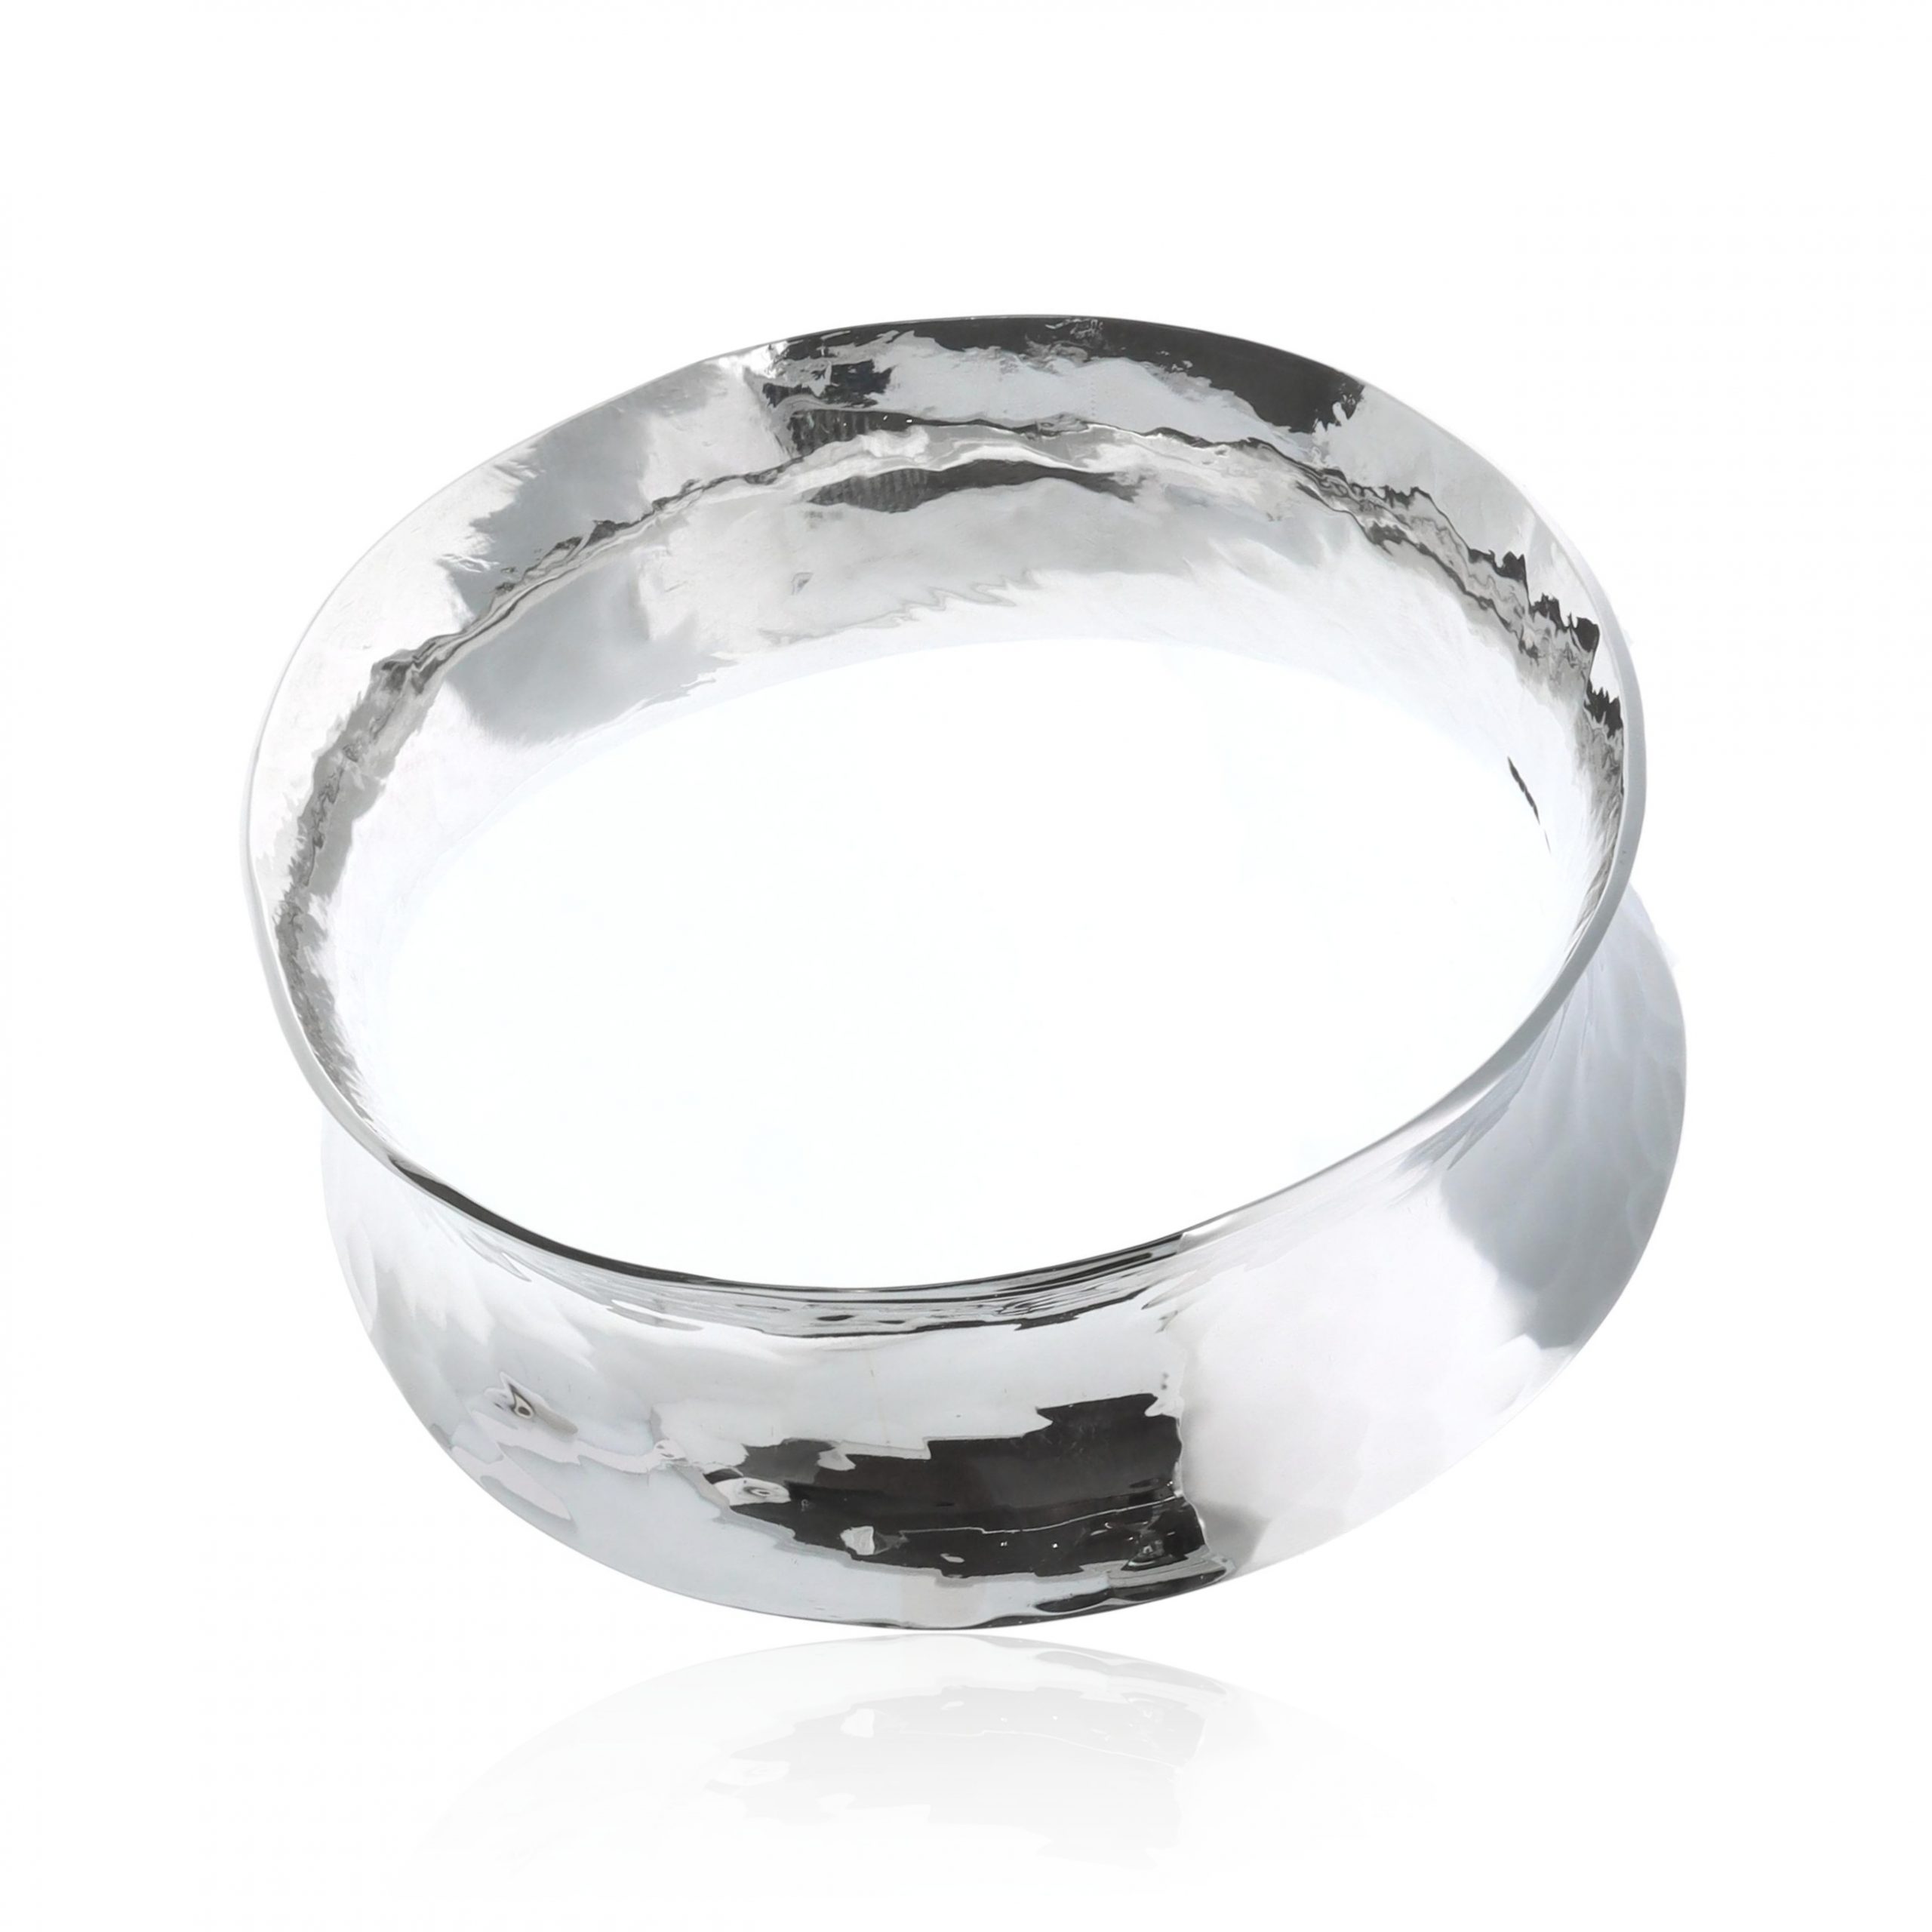 Stunning Silver Concave Bangle